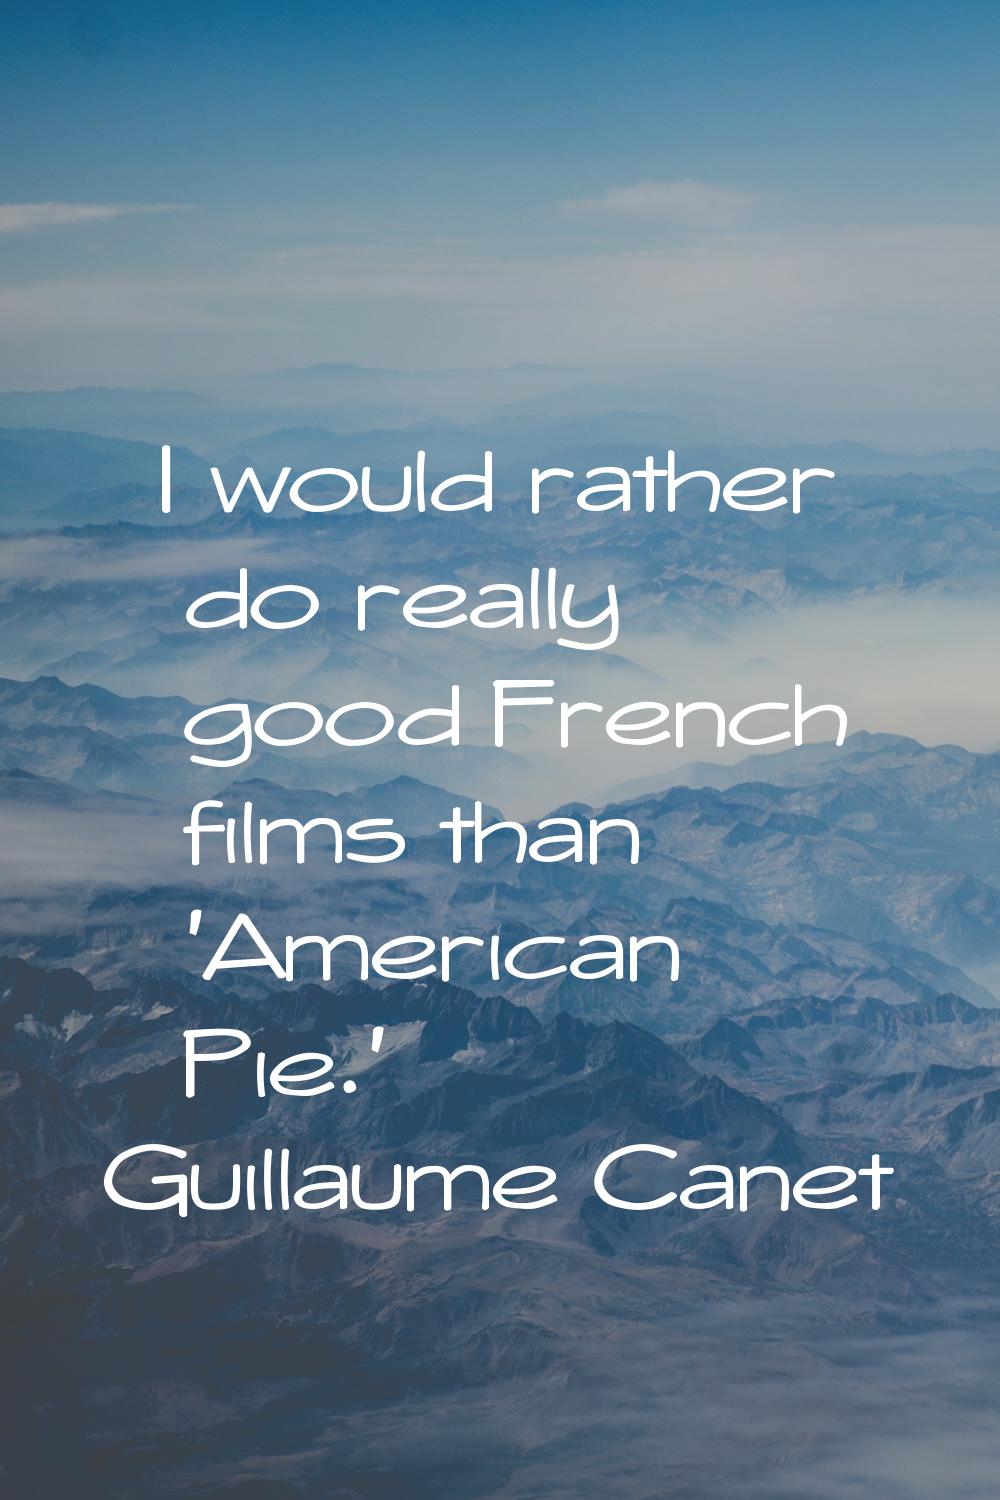 I would rather do really good French films than 'American Pie.'